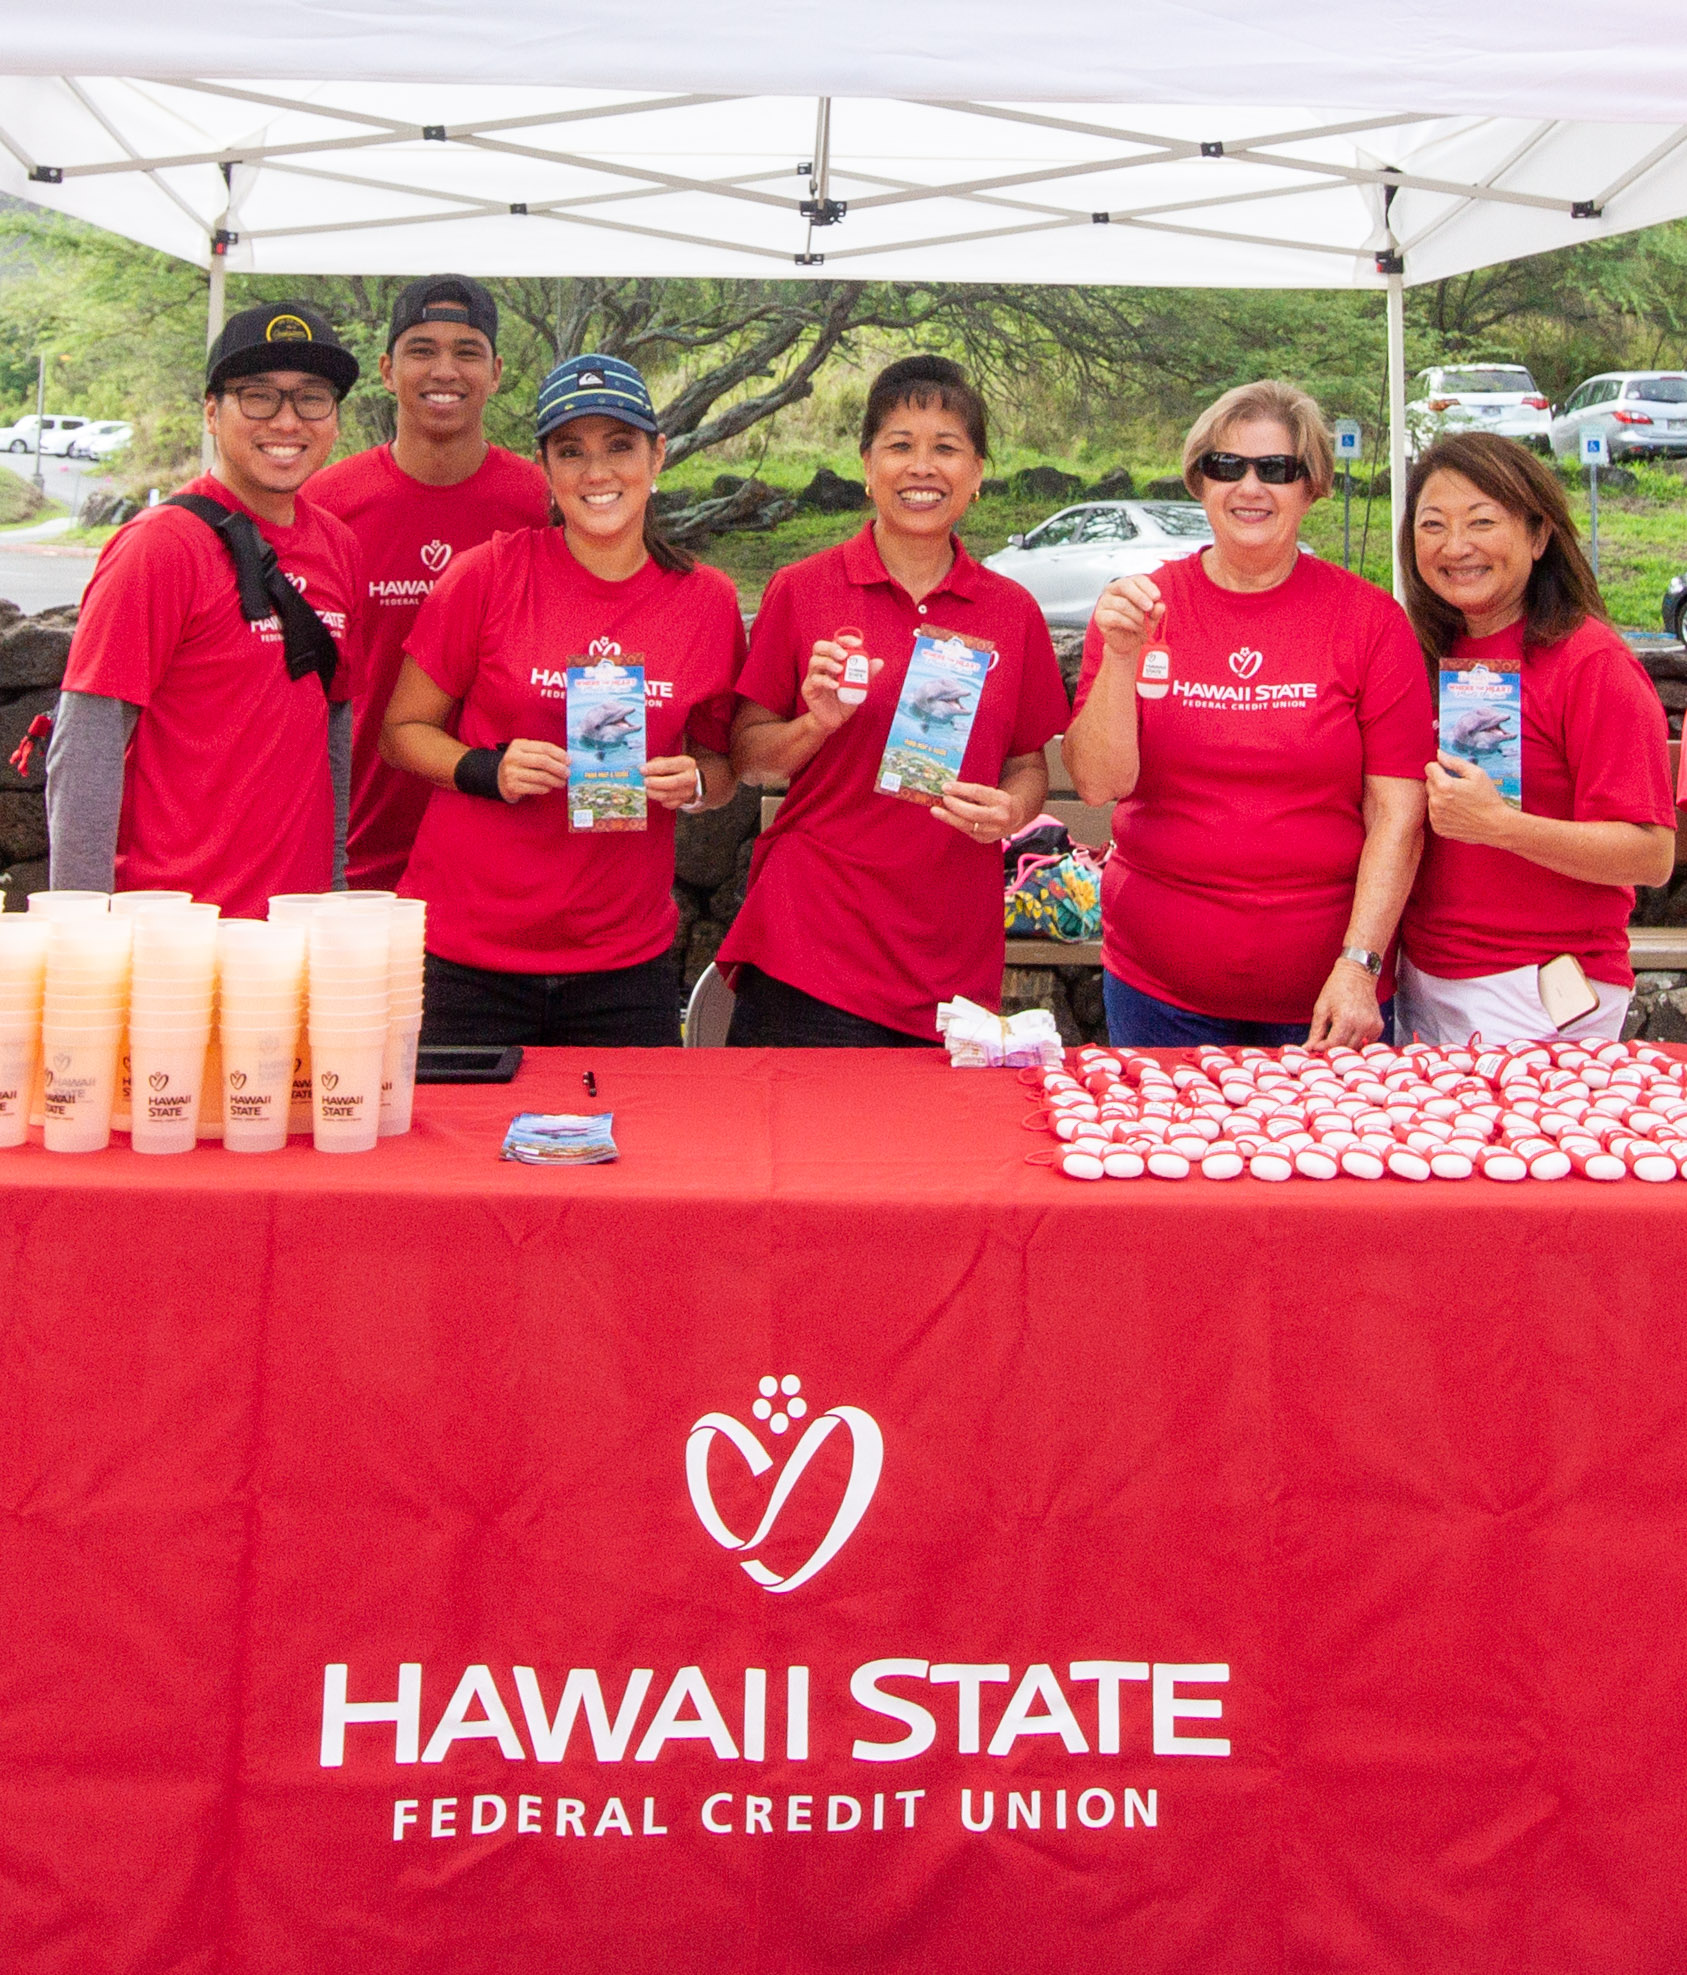 Hawaii State Federal Credit Union table under a tent